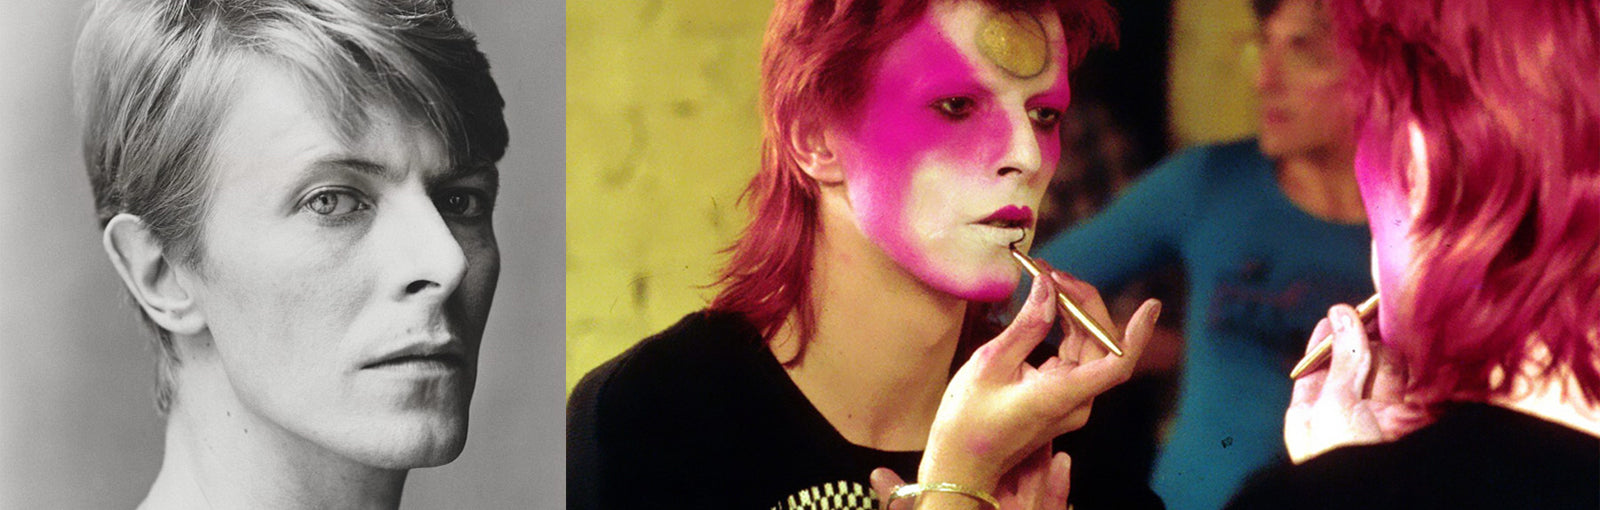 DAVID BOWIE PUSHED THE LIMITS OF MUSIC, ART &amp; FASHION